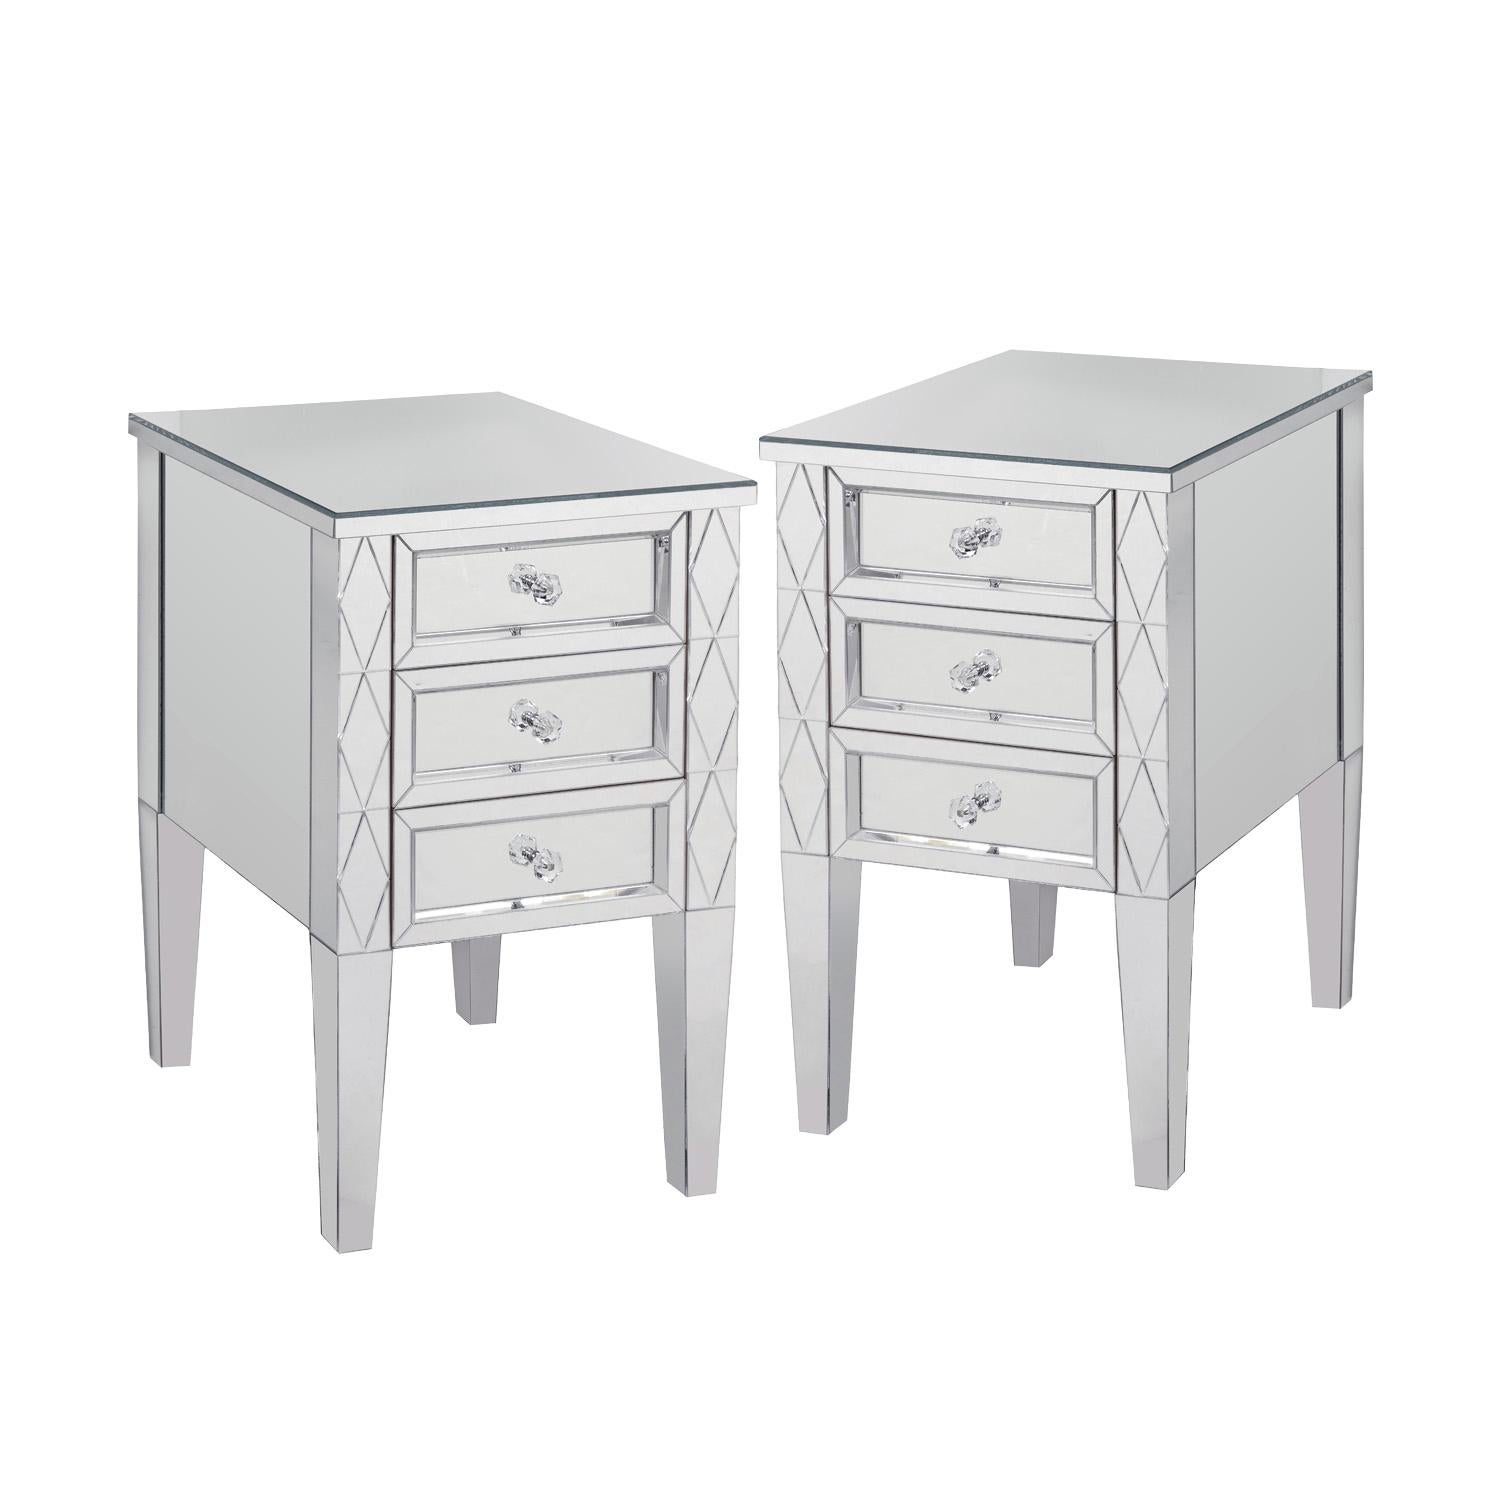 Pair of mirrored 3-drawer nightstands with diamond cut front, and polished nickel and crystal pulls. All drawers are 12-1/2